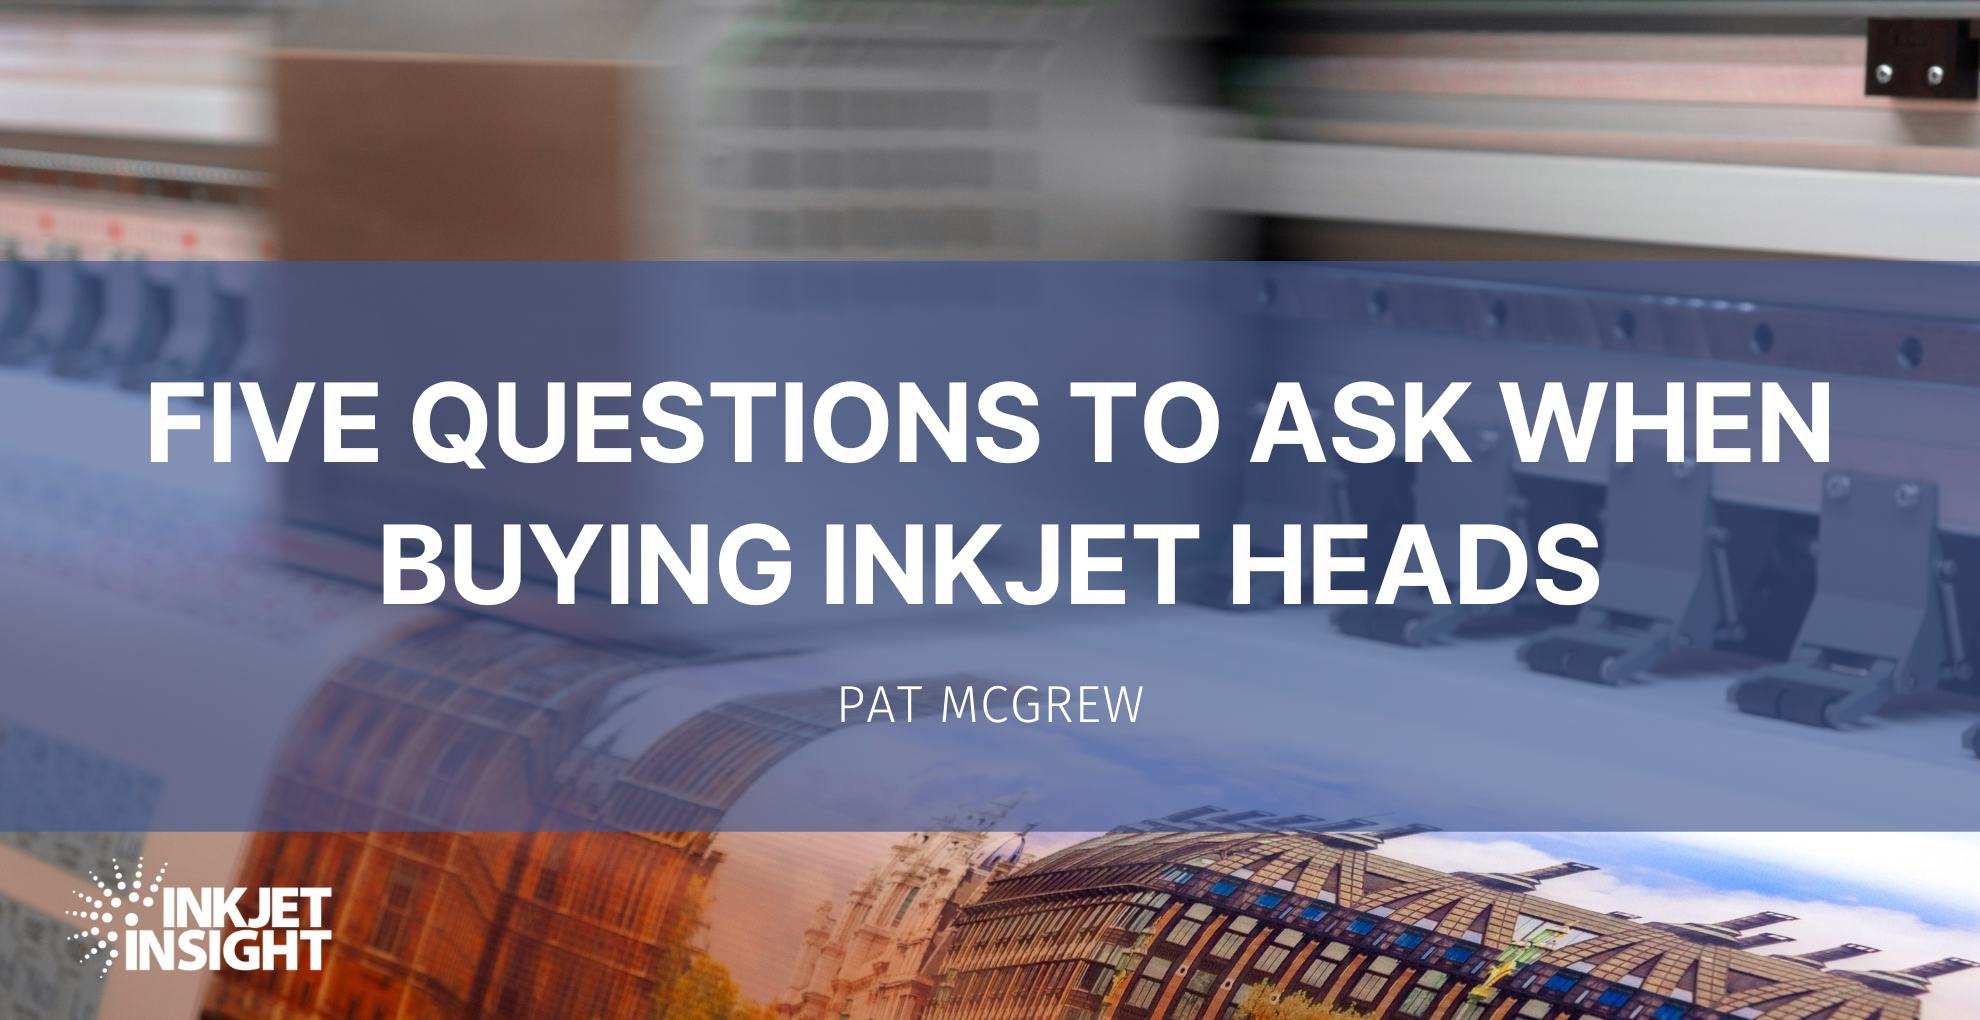 Featured image for “Five Questions to Ask When Buying Inkjet Heads”